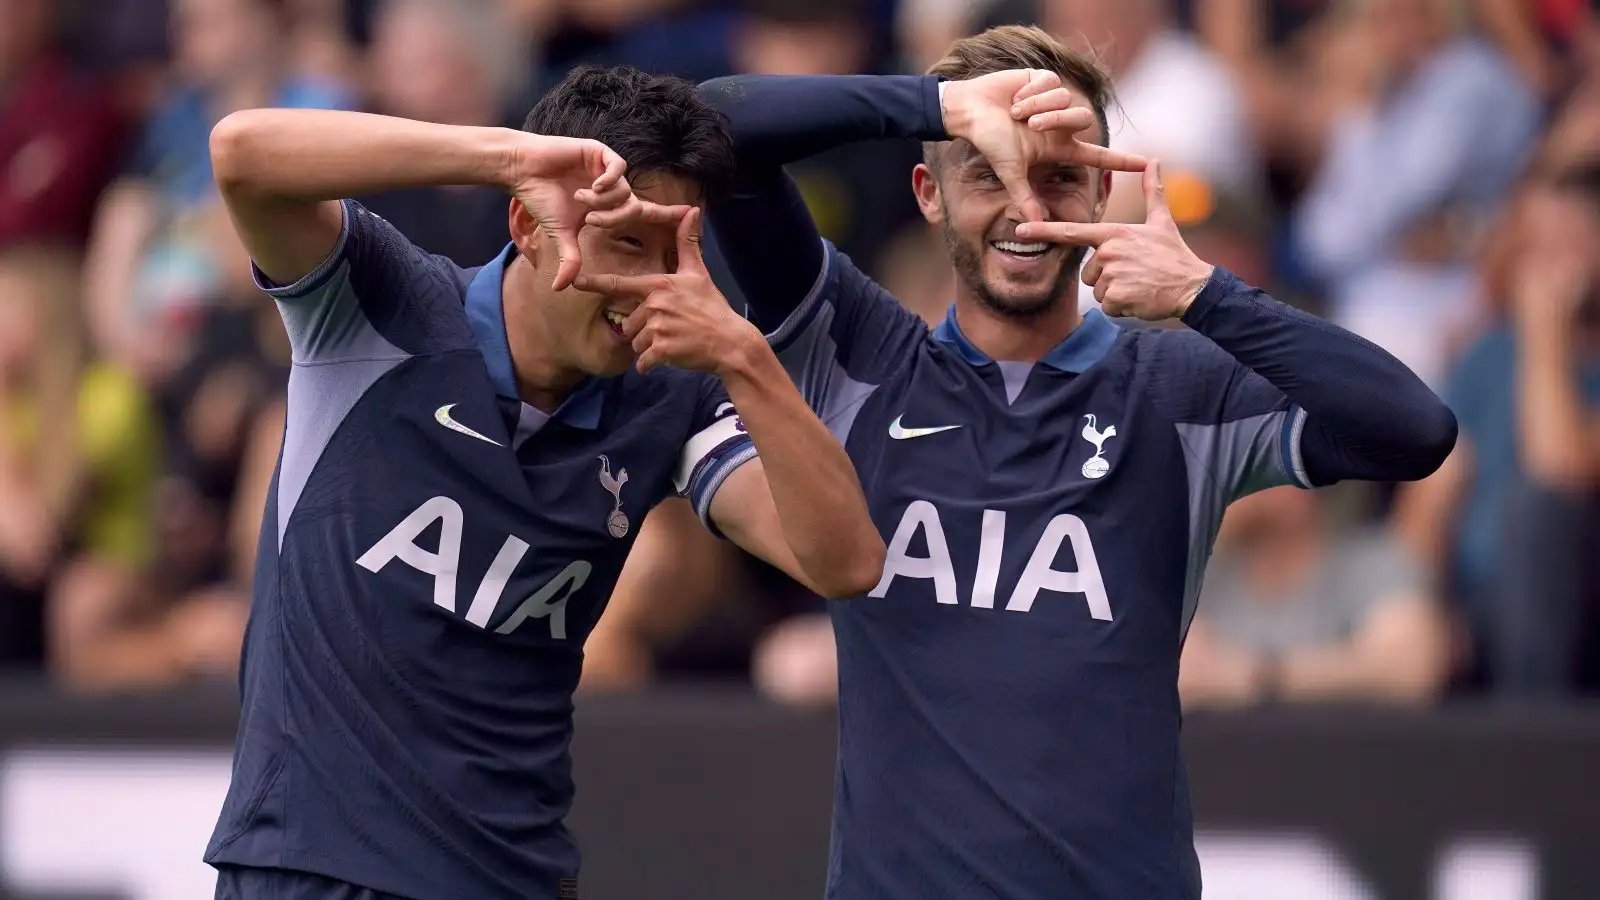 James Maddison and Heung-min Son celebrate a goal.